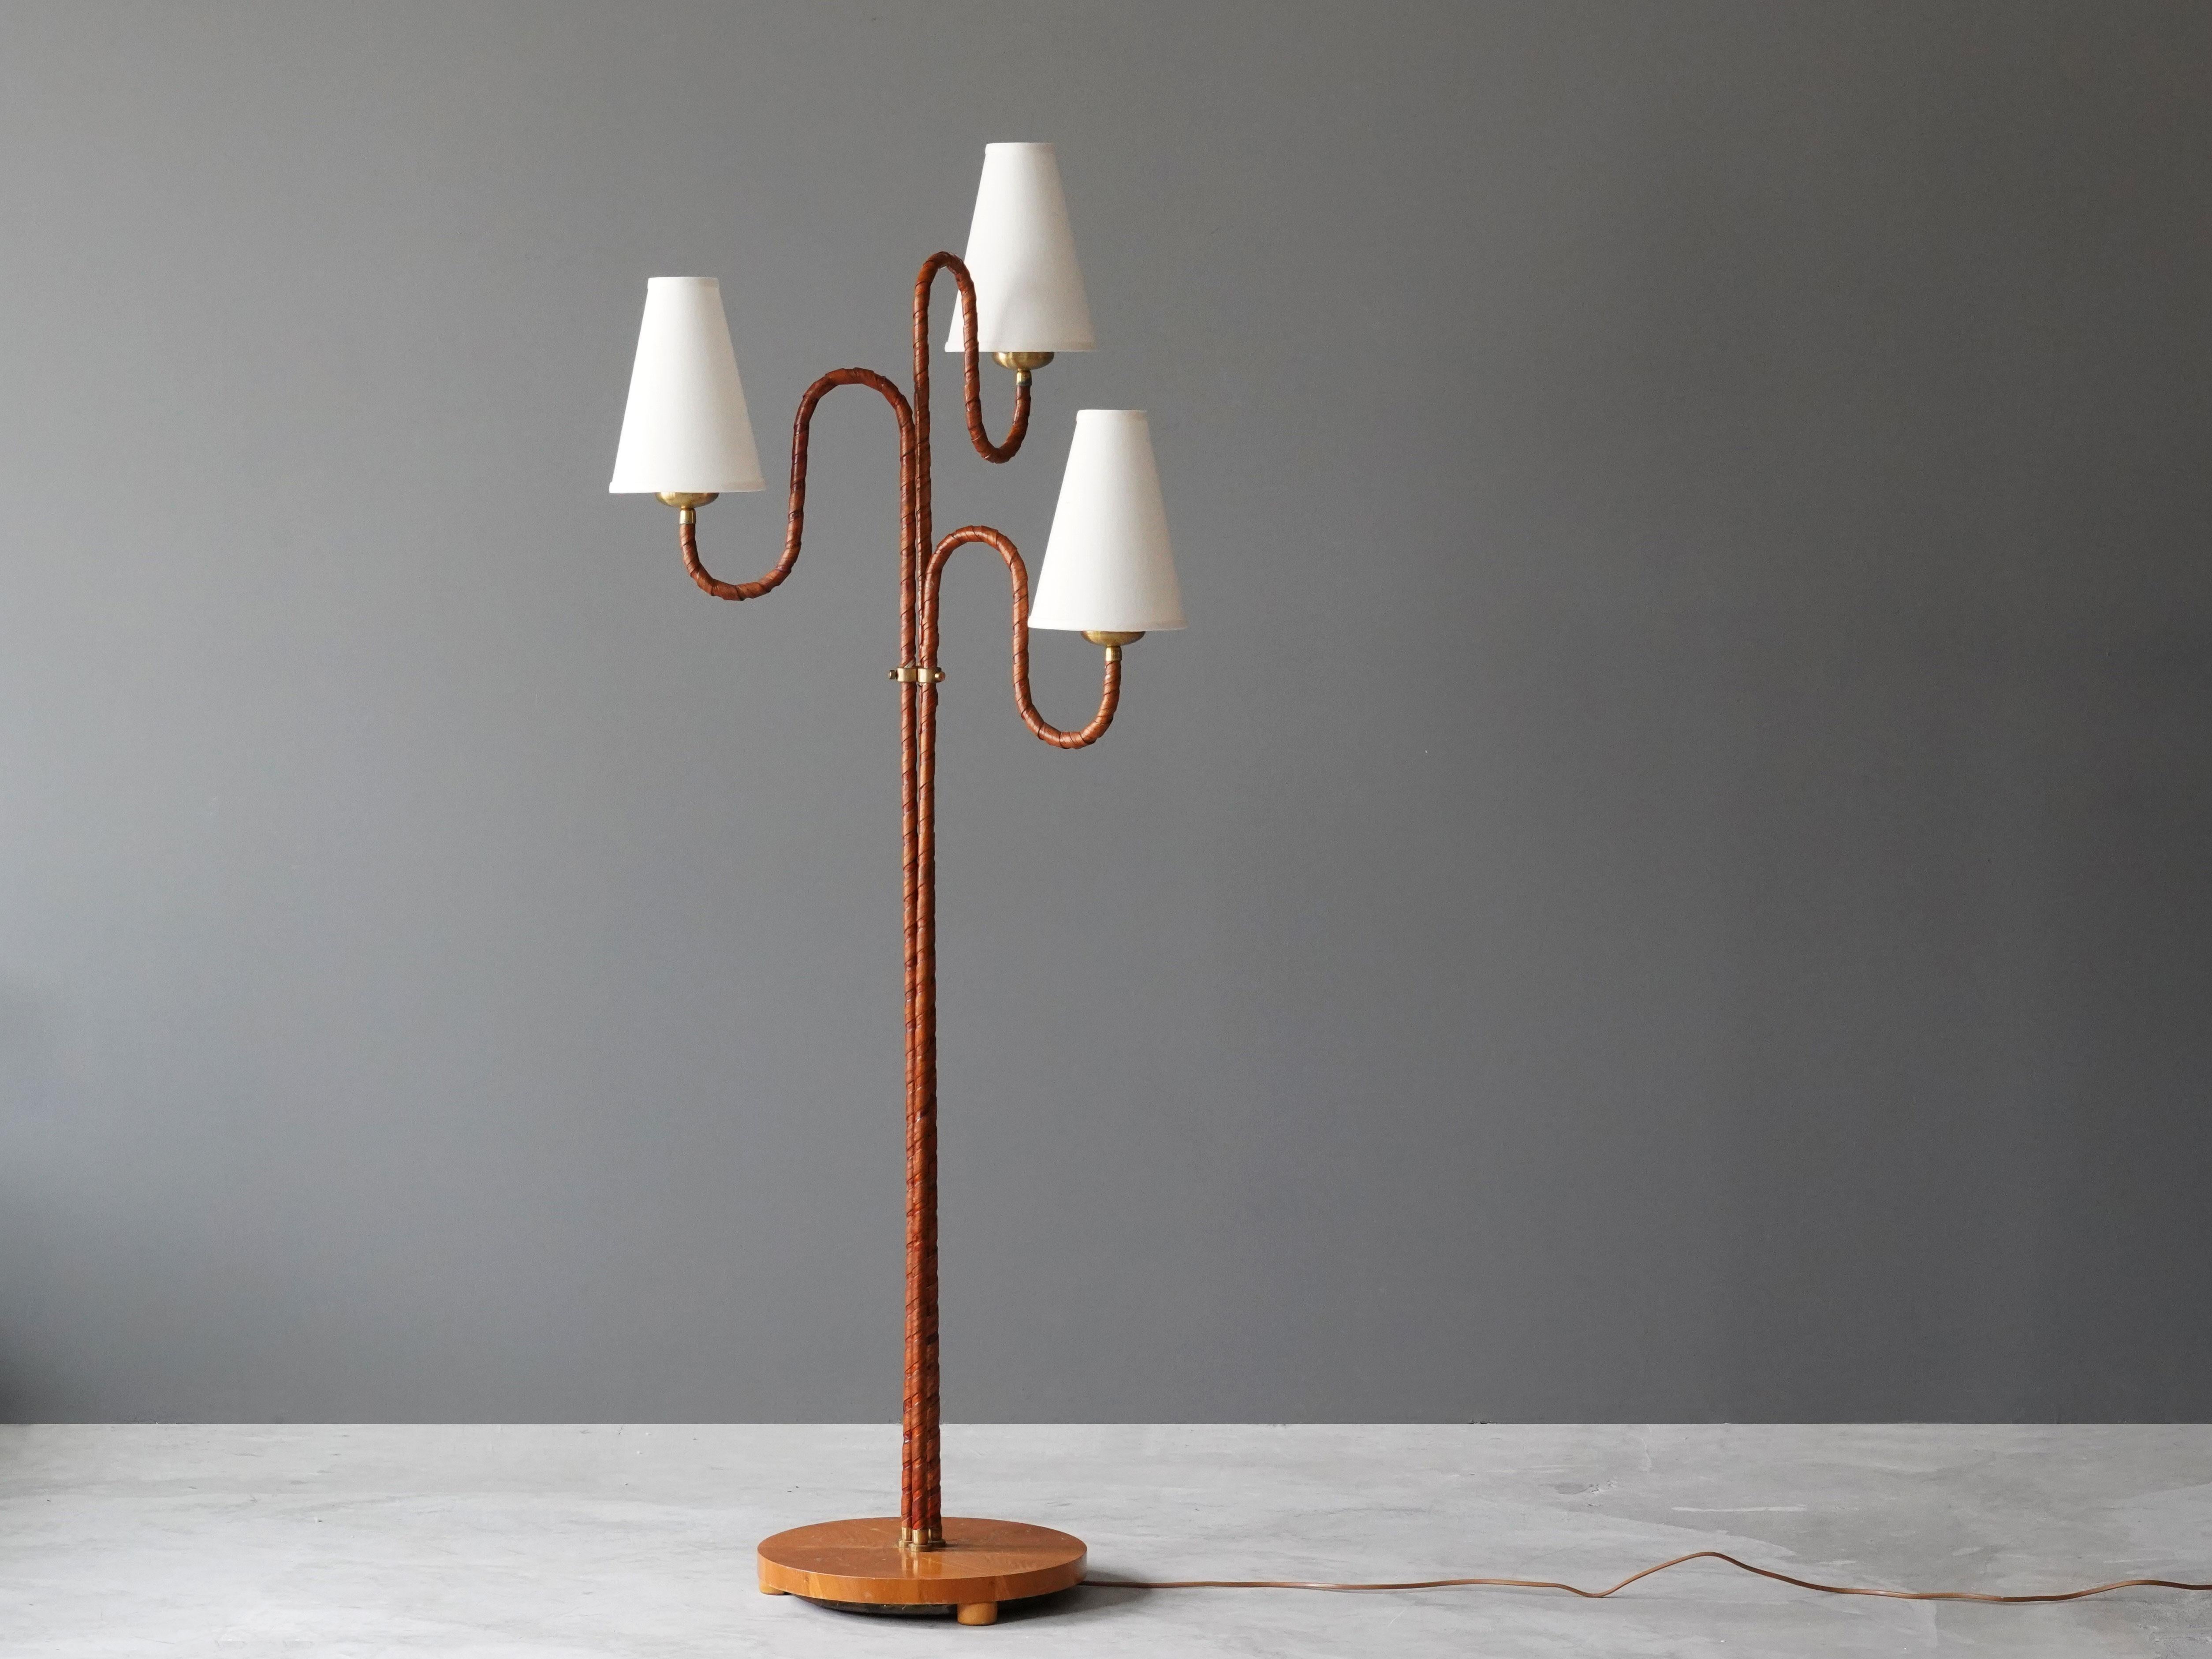 An organic three-armed floor lamp. Designed by an unknown Swedish modernist designer, 1930s. Possibly manufactured by Böhlmarks. Produced in rattan, wood, linen, and brass. Arms adjustable. 

Other designers working in the organic style include Jean